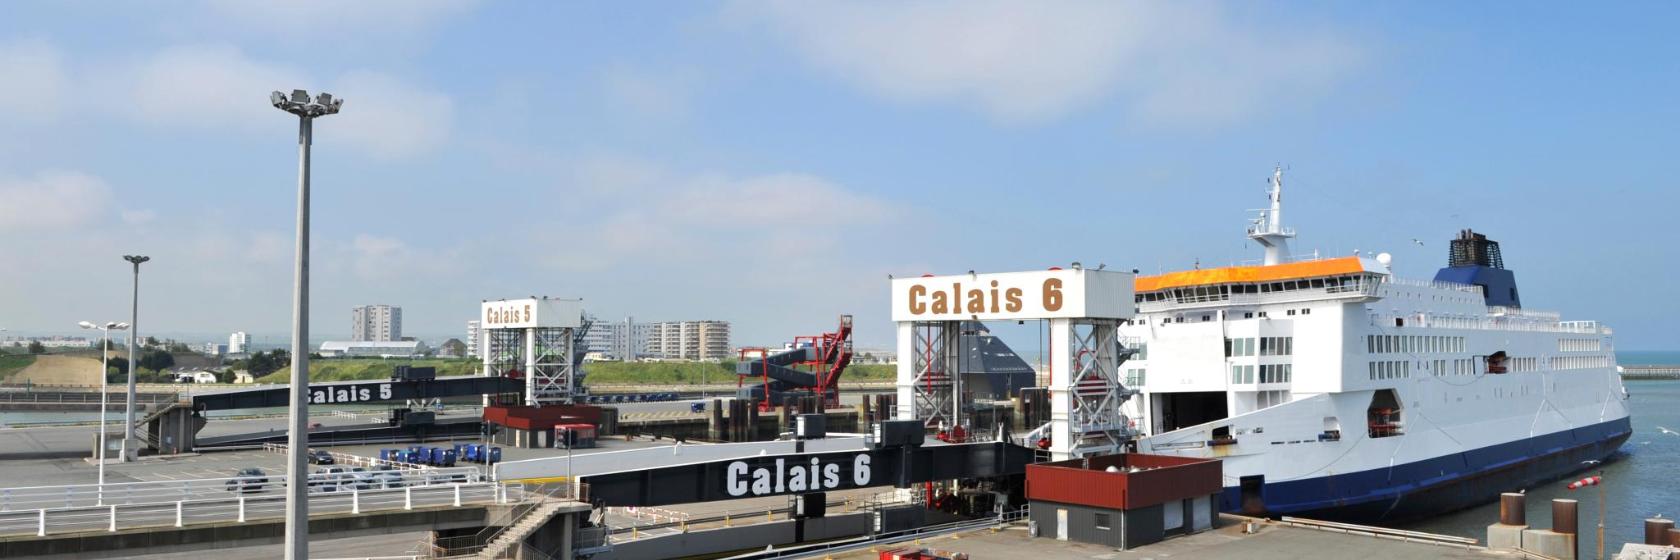 The 10 best hotels close to Calais Ferry Terminal in Calais, France